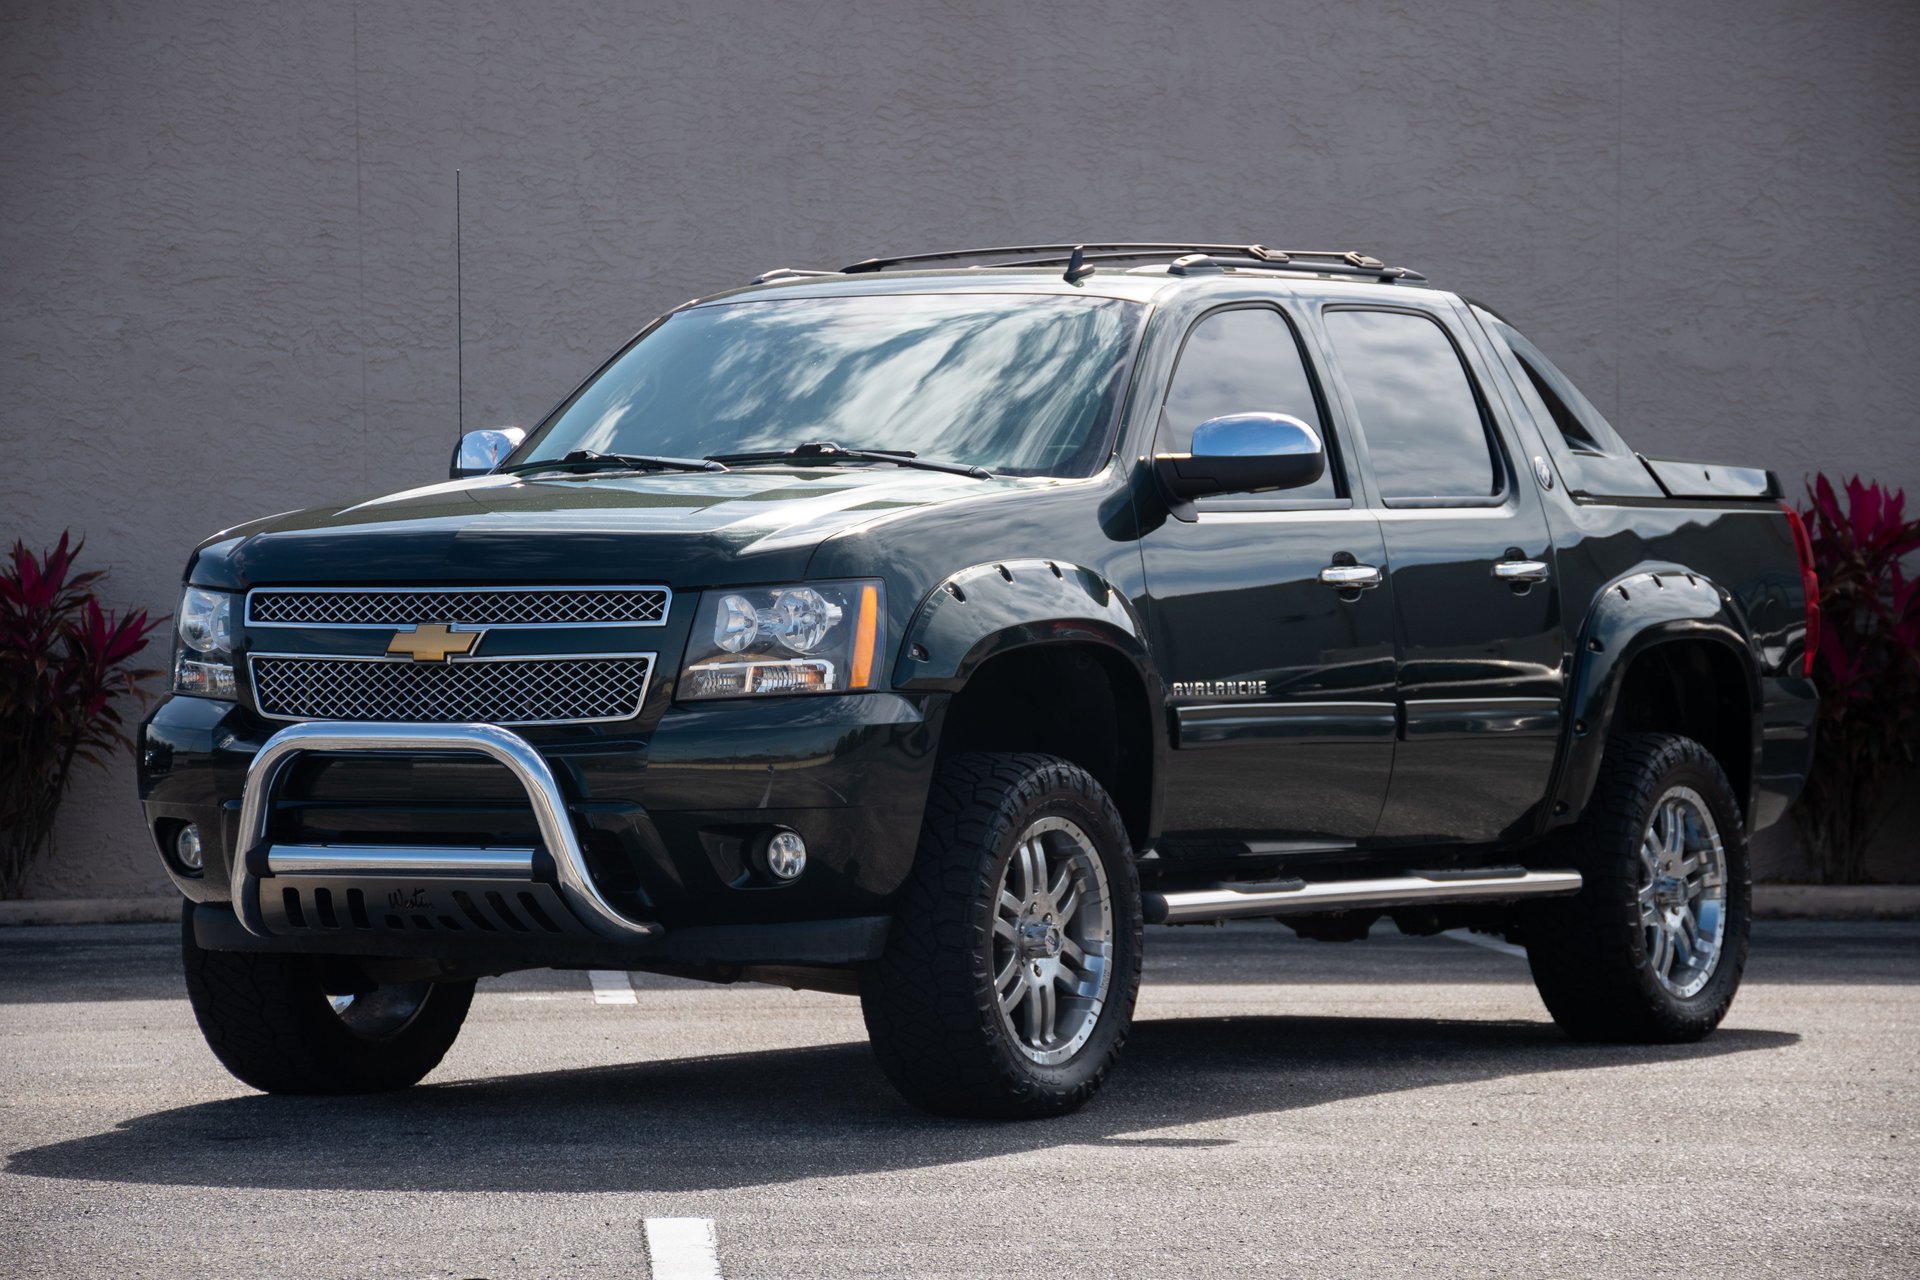 2013 Chevrolet Avalanche | Ideal Classic Cars LLC